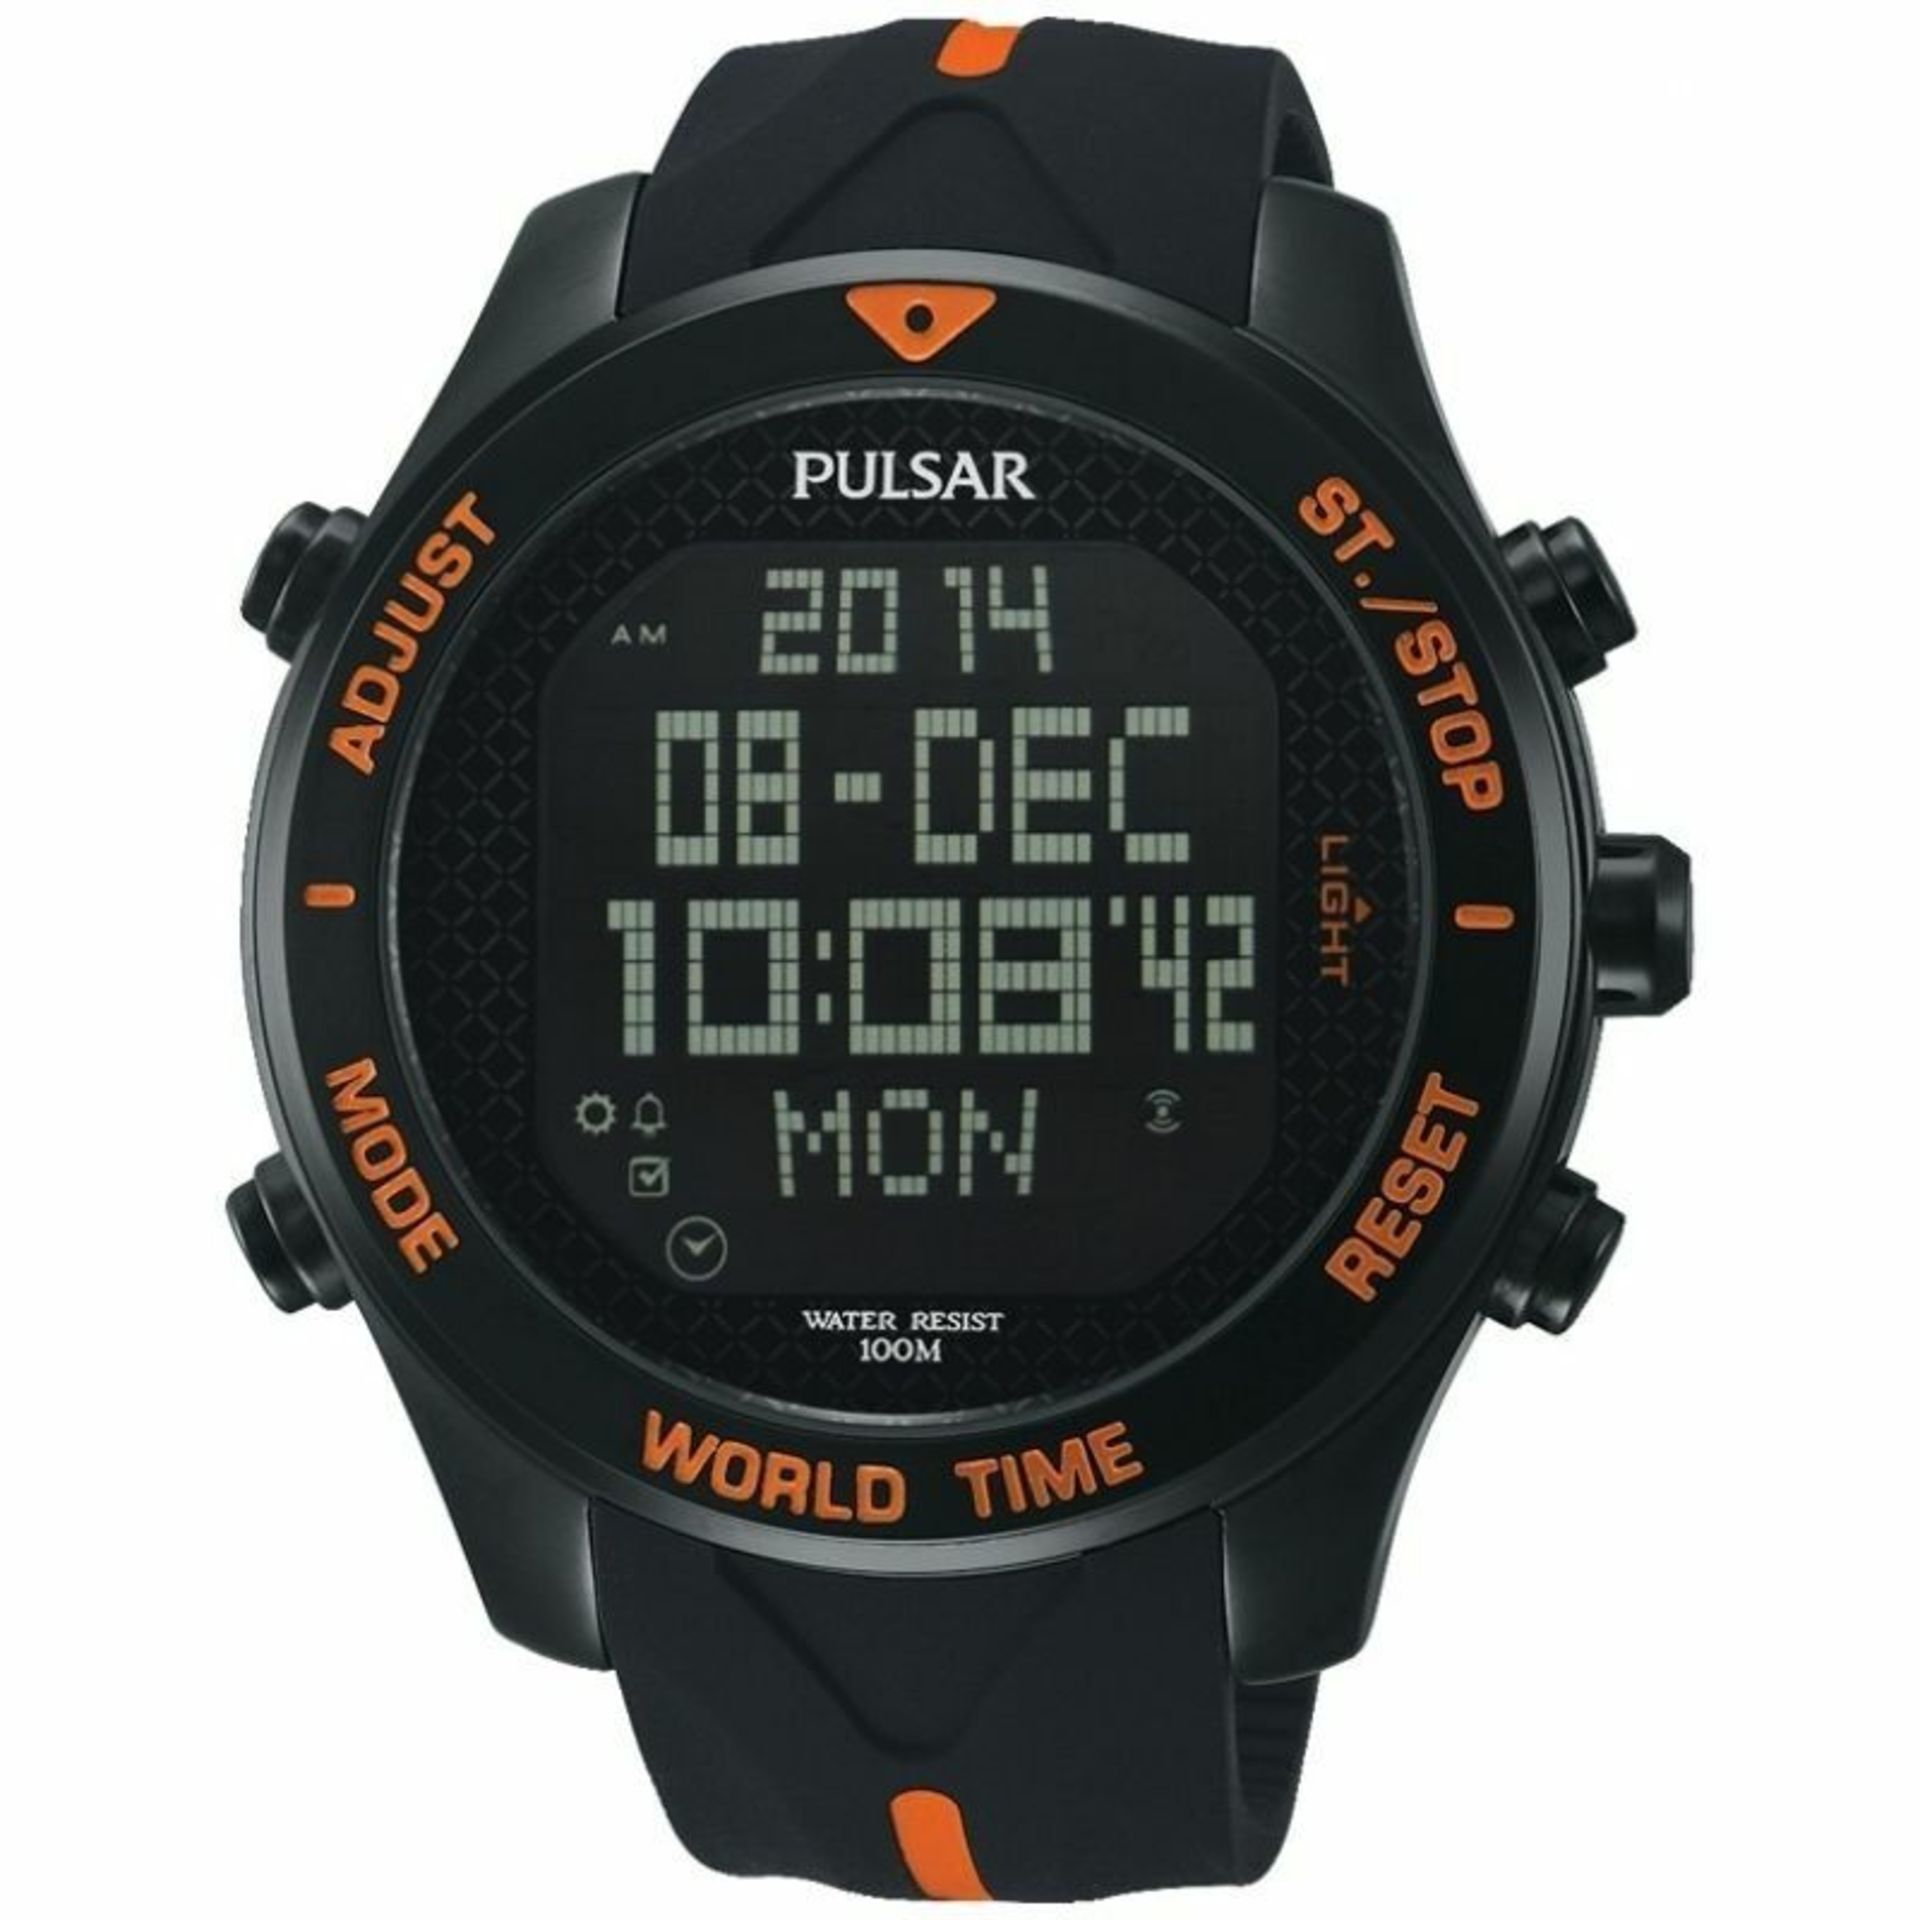 Pulsar Gents Digital Rubber Strap Multi-Function Sports Watch PQ2037 replace battery - Image 2 of 2